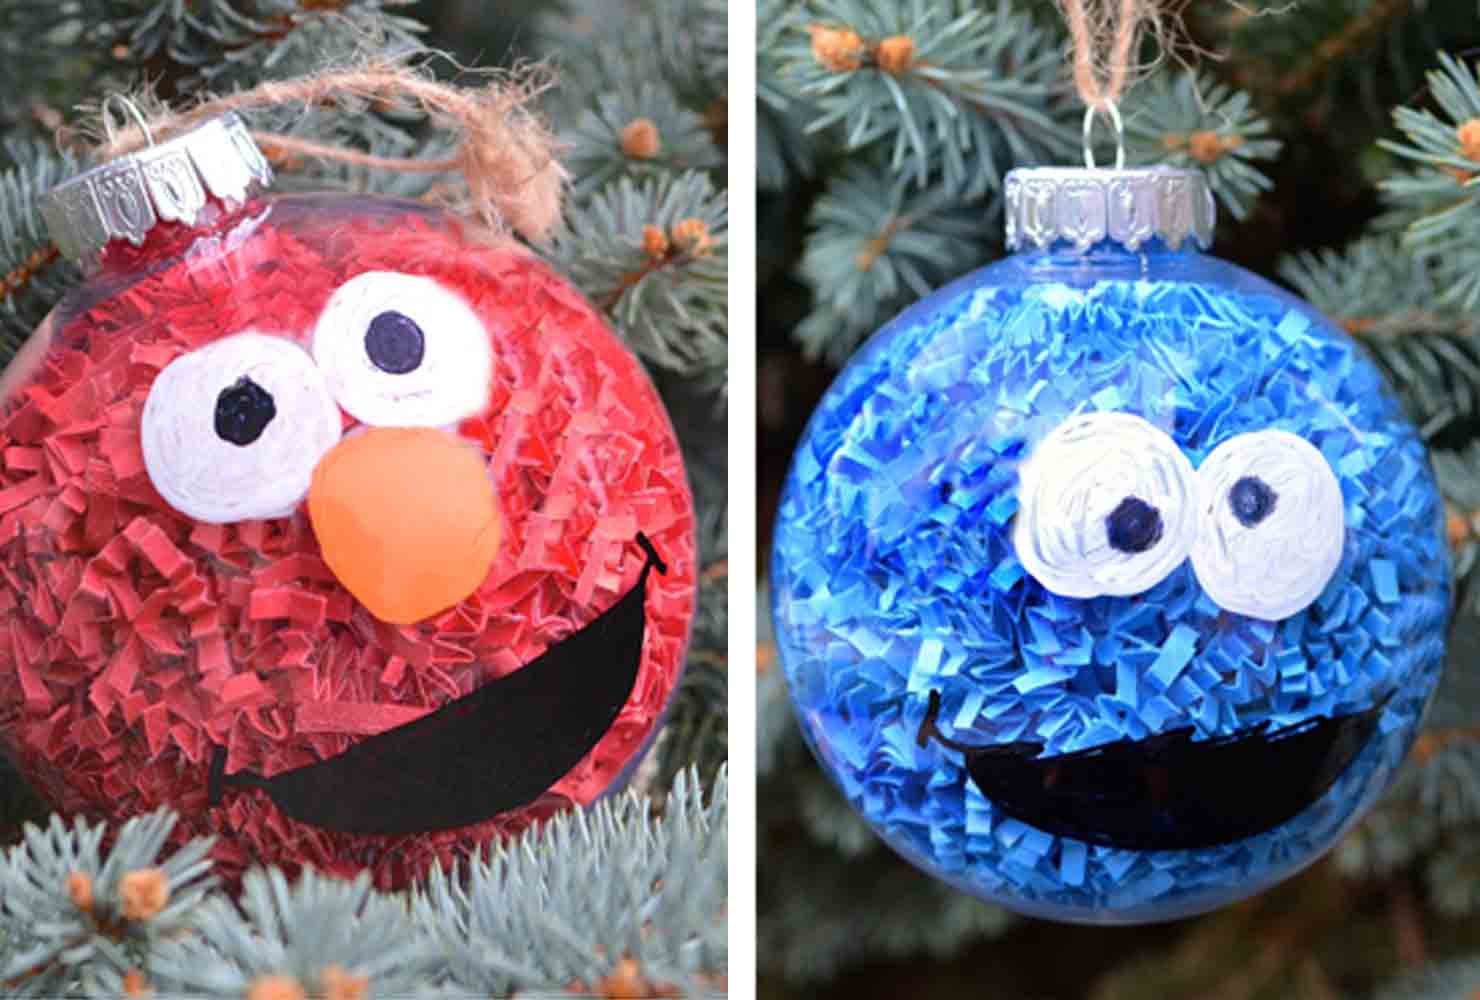  Elmo and Cookie Monster ornaments